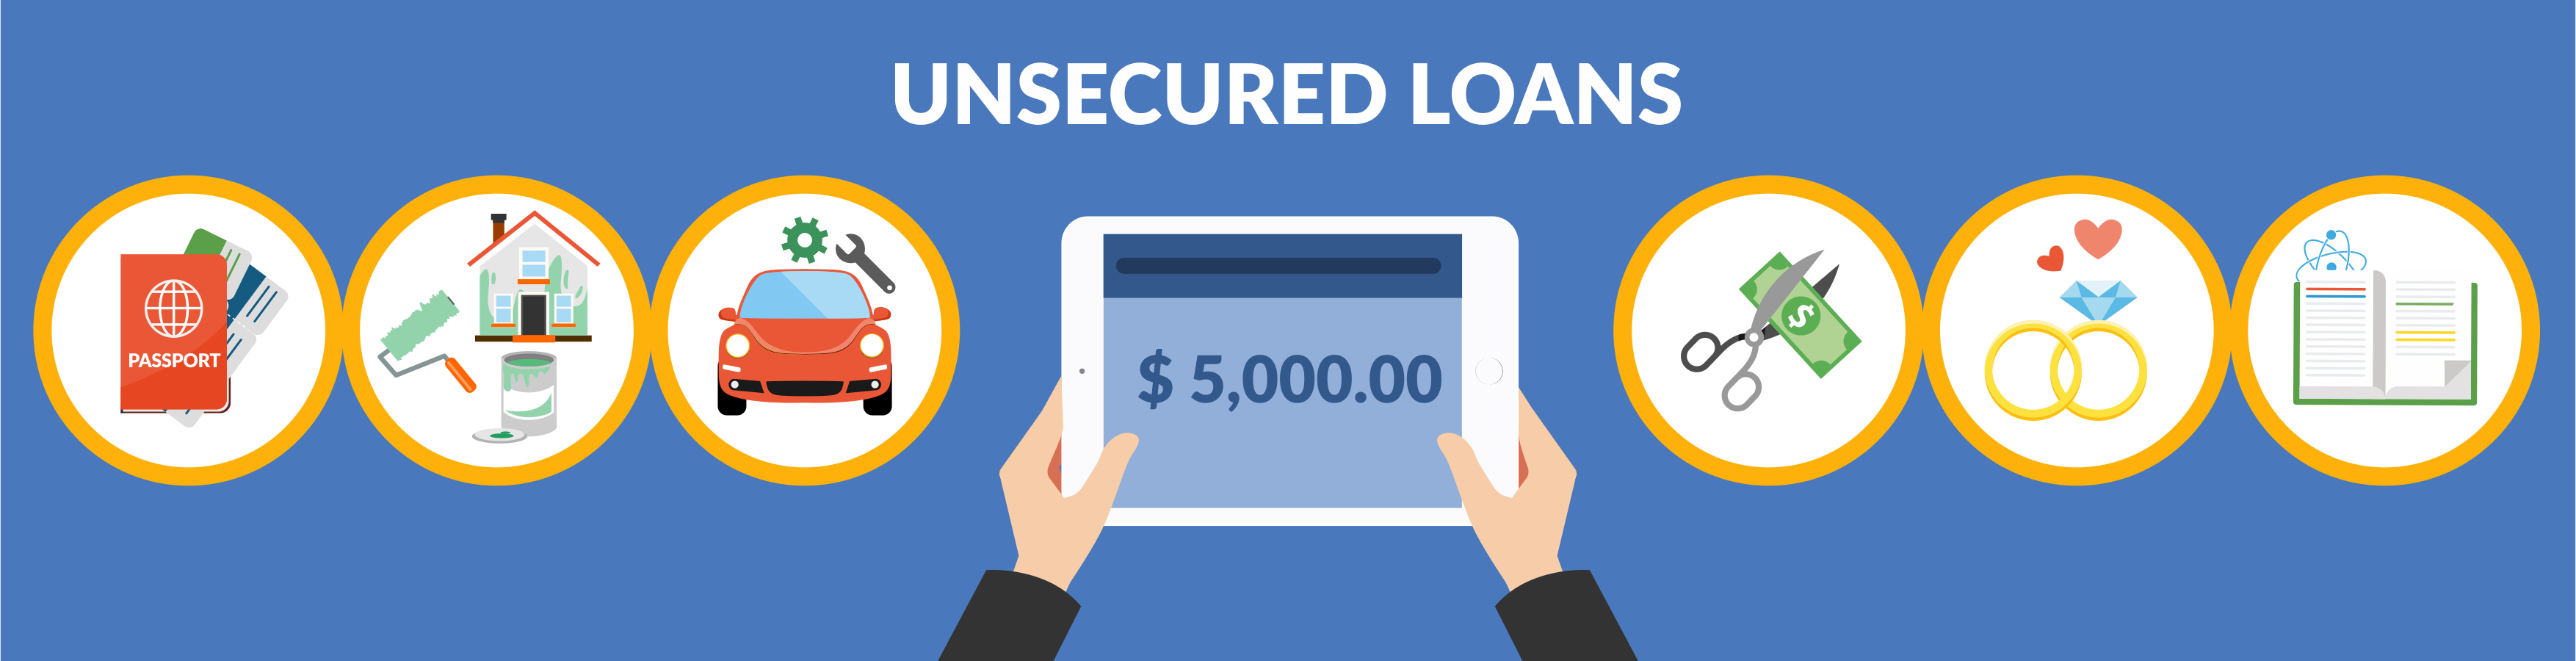 Unsecured Loans 